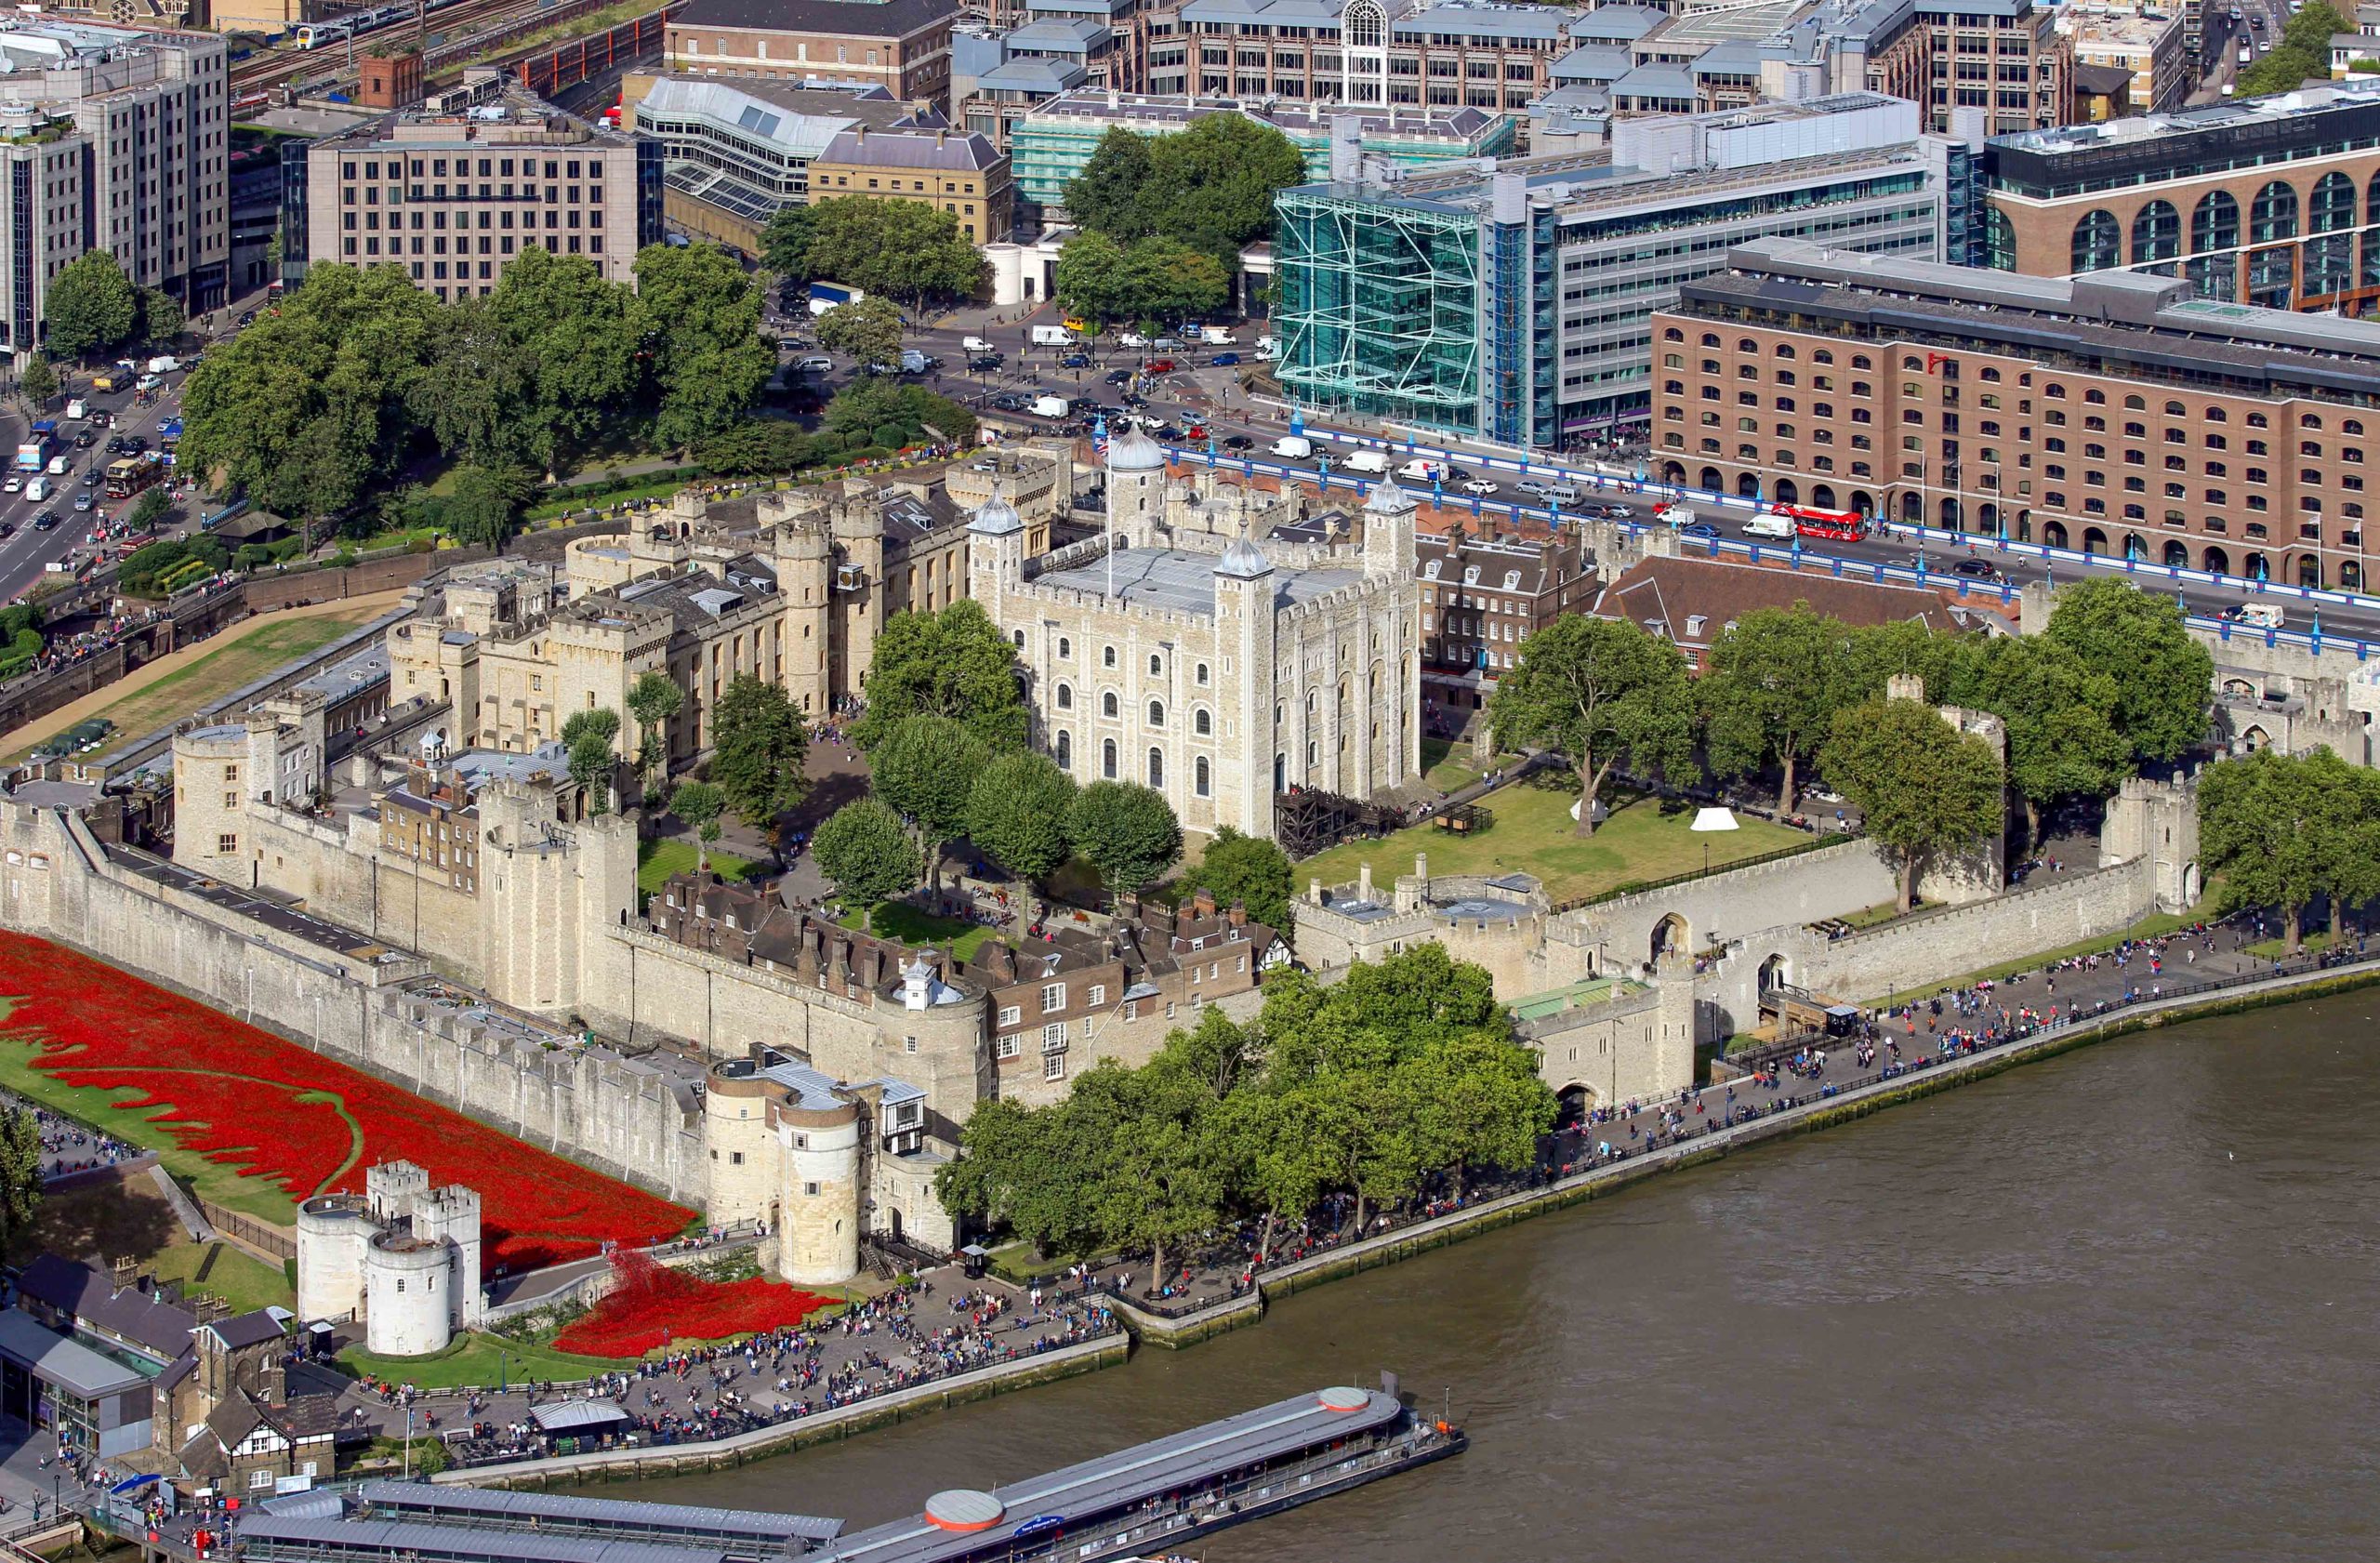 Châteaux anglais - Tower of London © Hilarmont - licence [CC BY-SA 3.0 de] from Wikimedia Commons